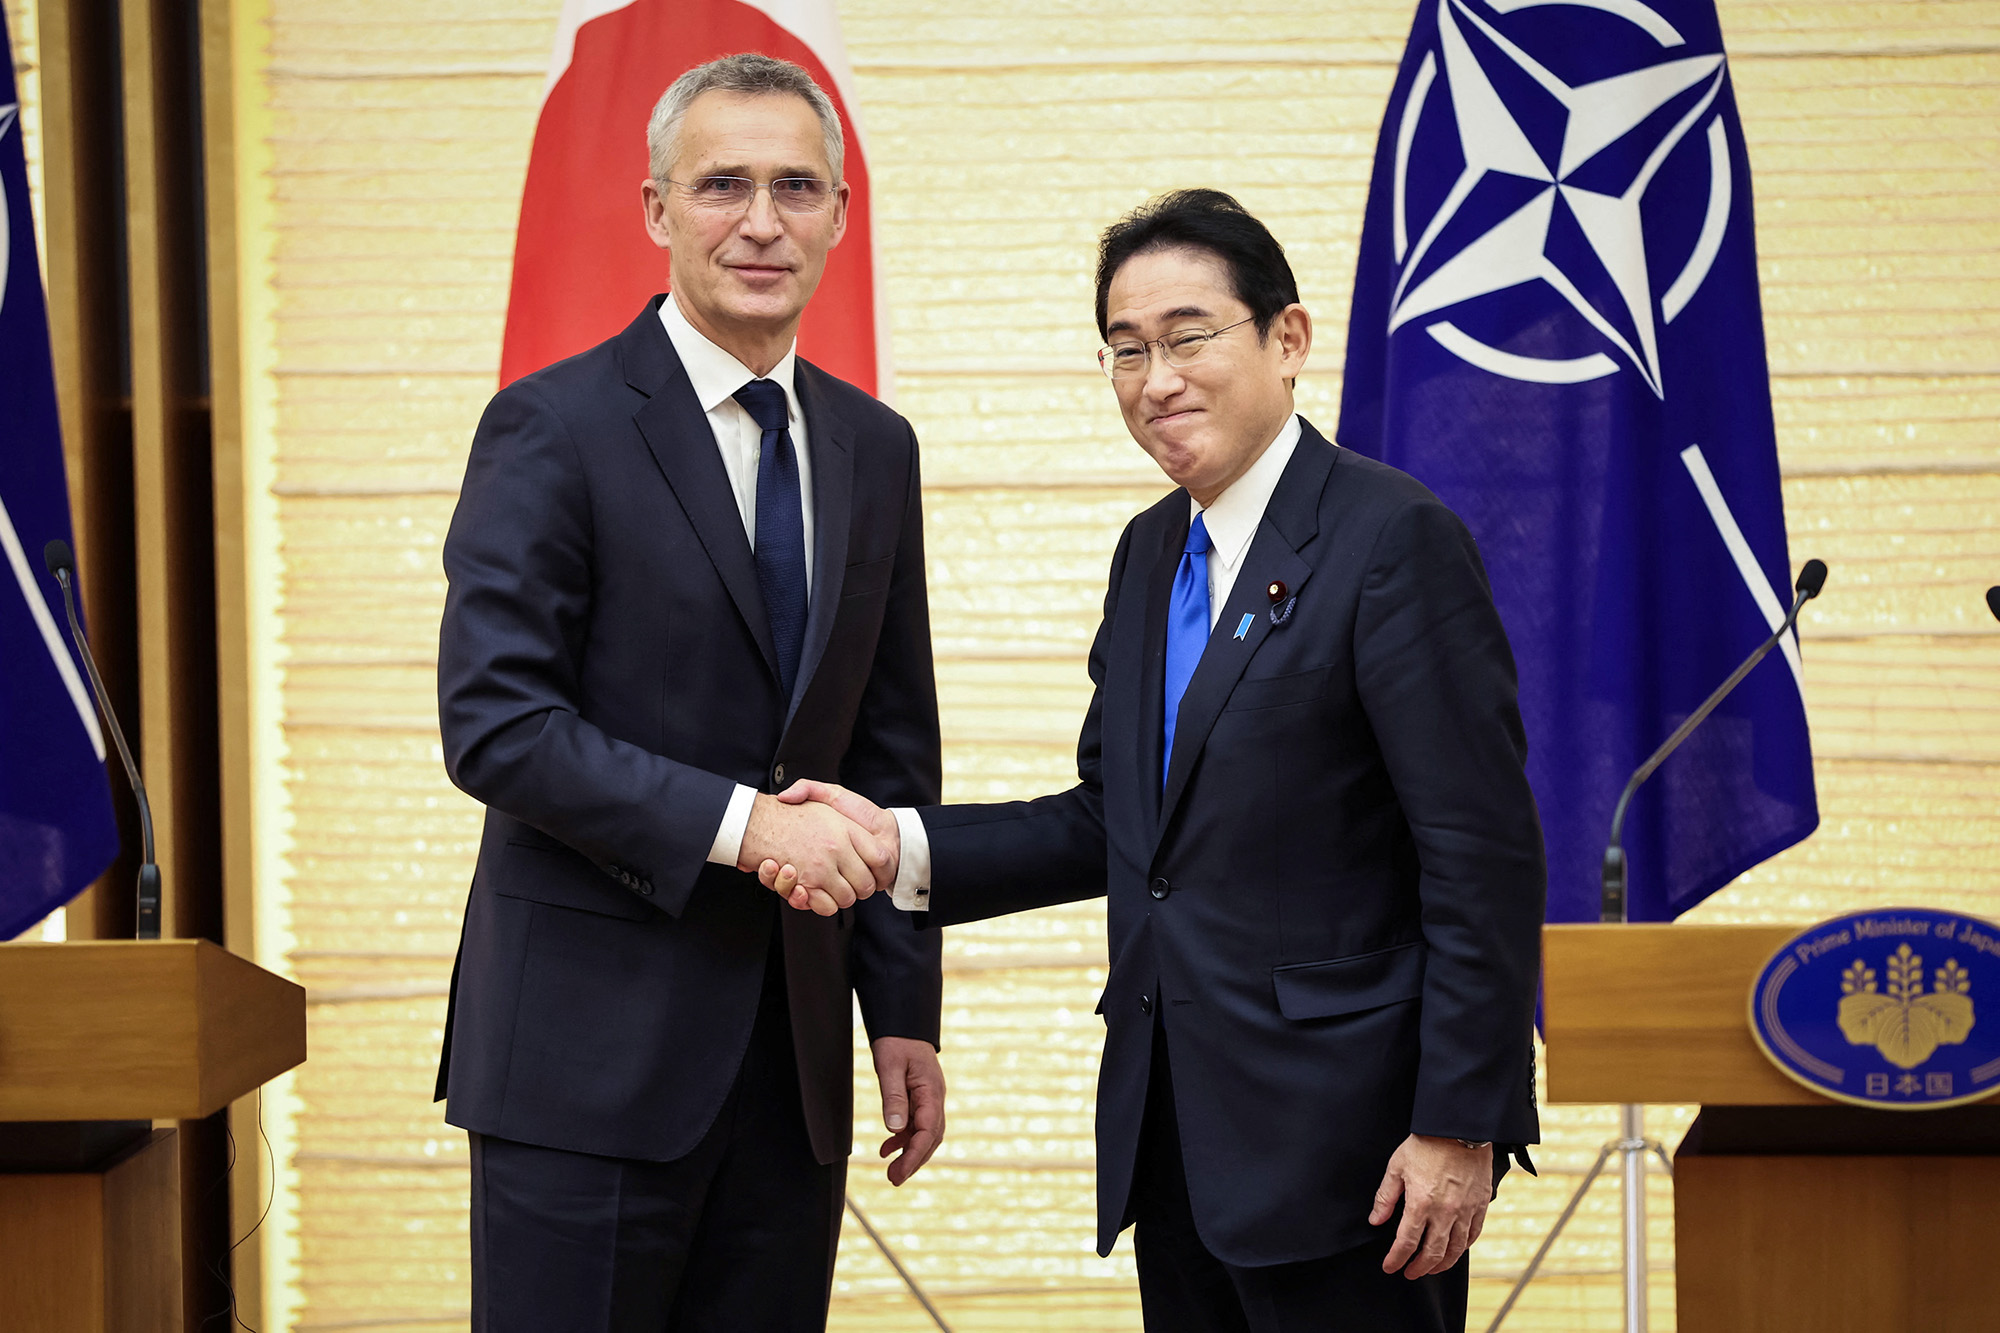 NATO, Japan pledge to strengthen ties amid threat to "international rules-based order"